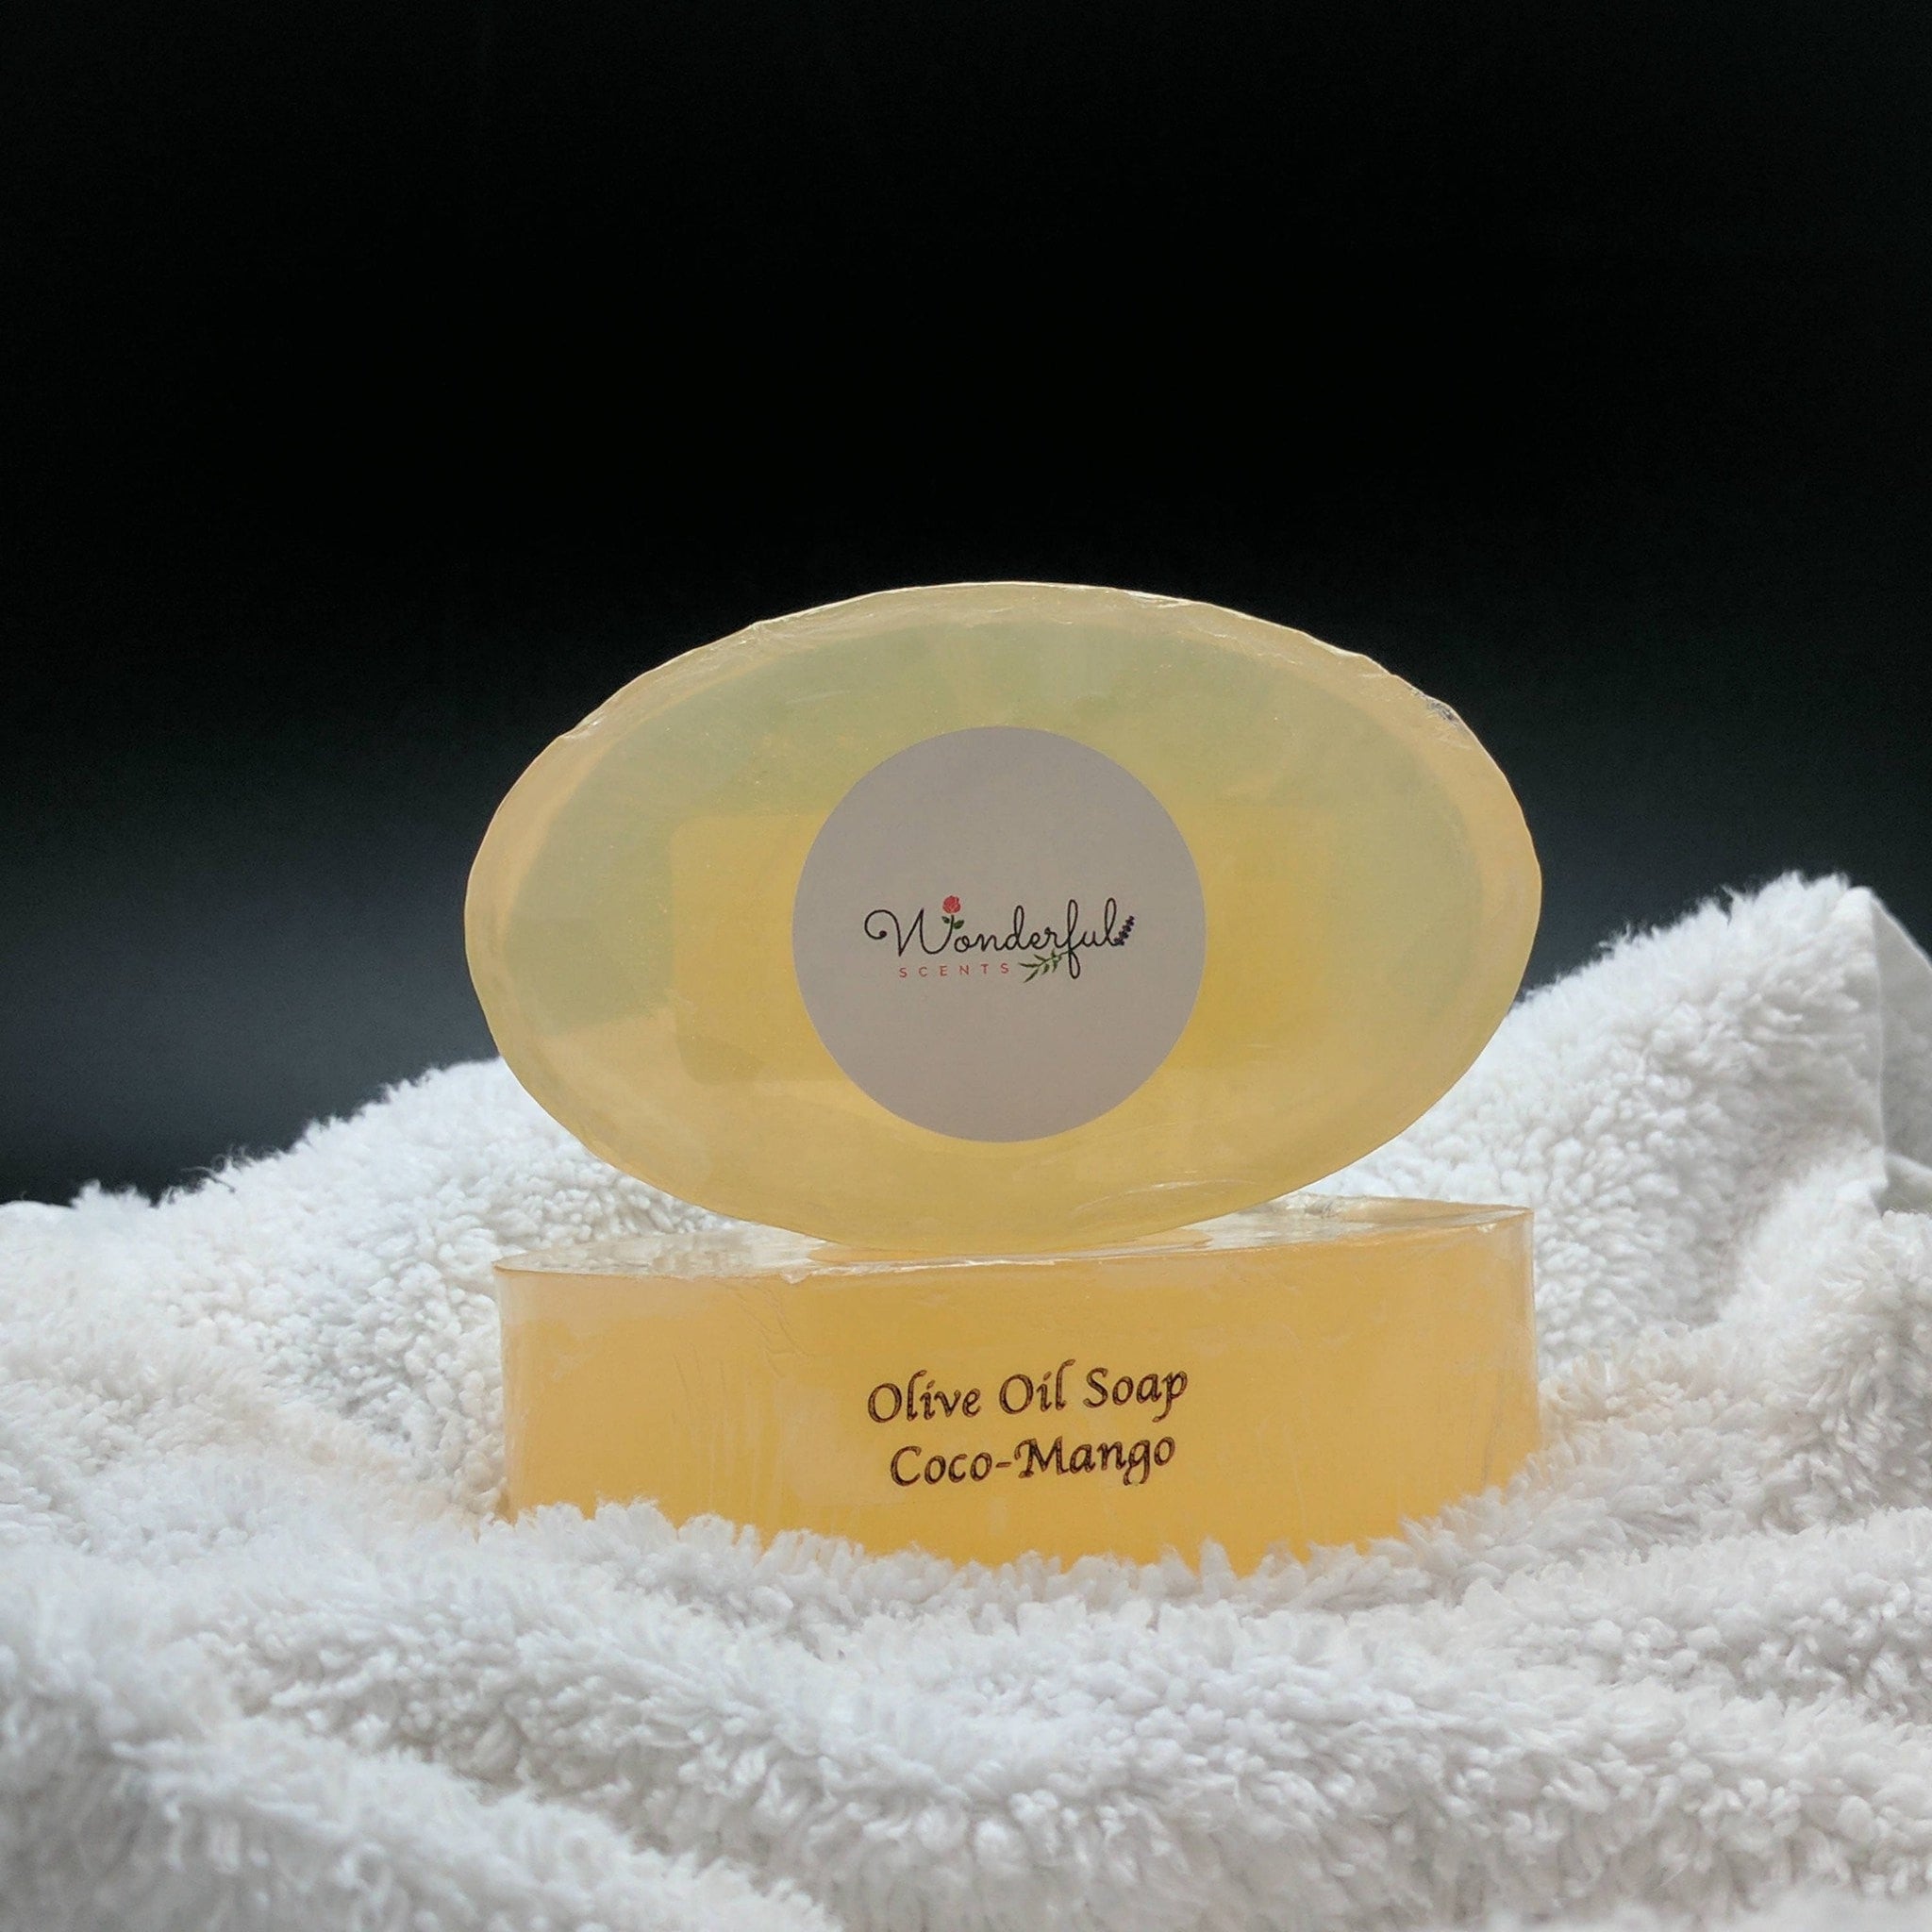 Natural and Pure Olive Oil Soap Scented with Coco Mango Essential Oils